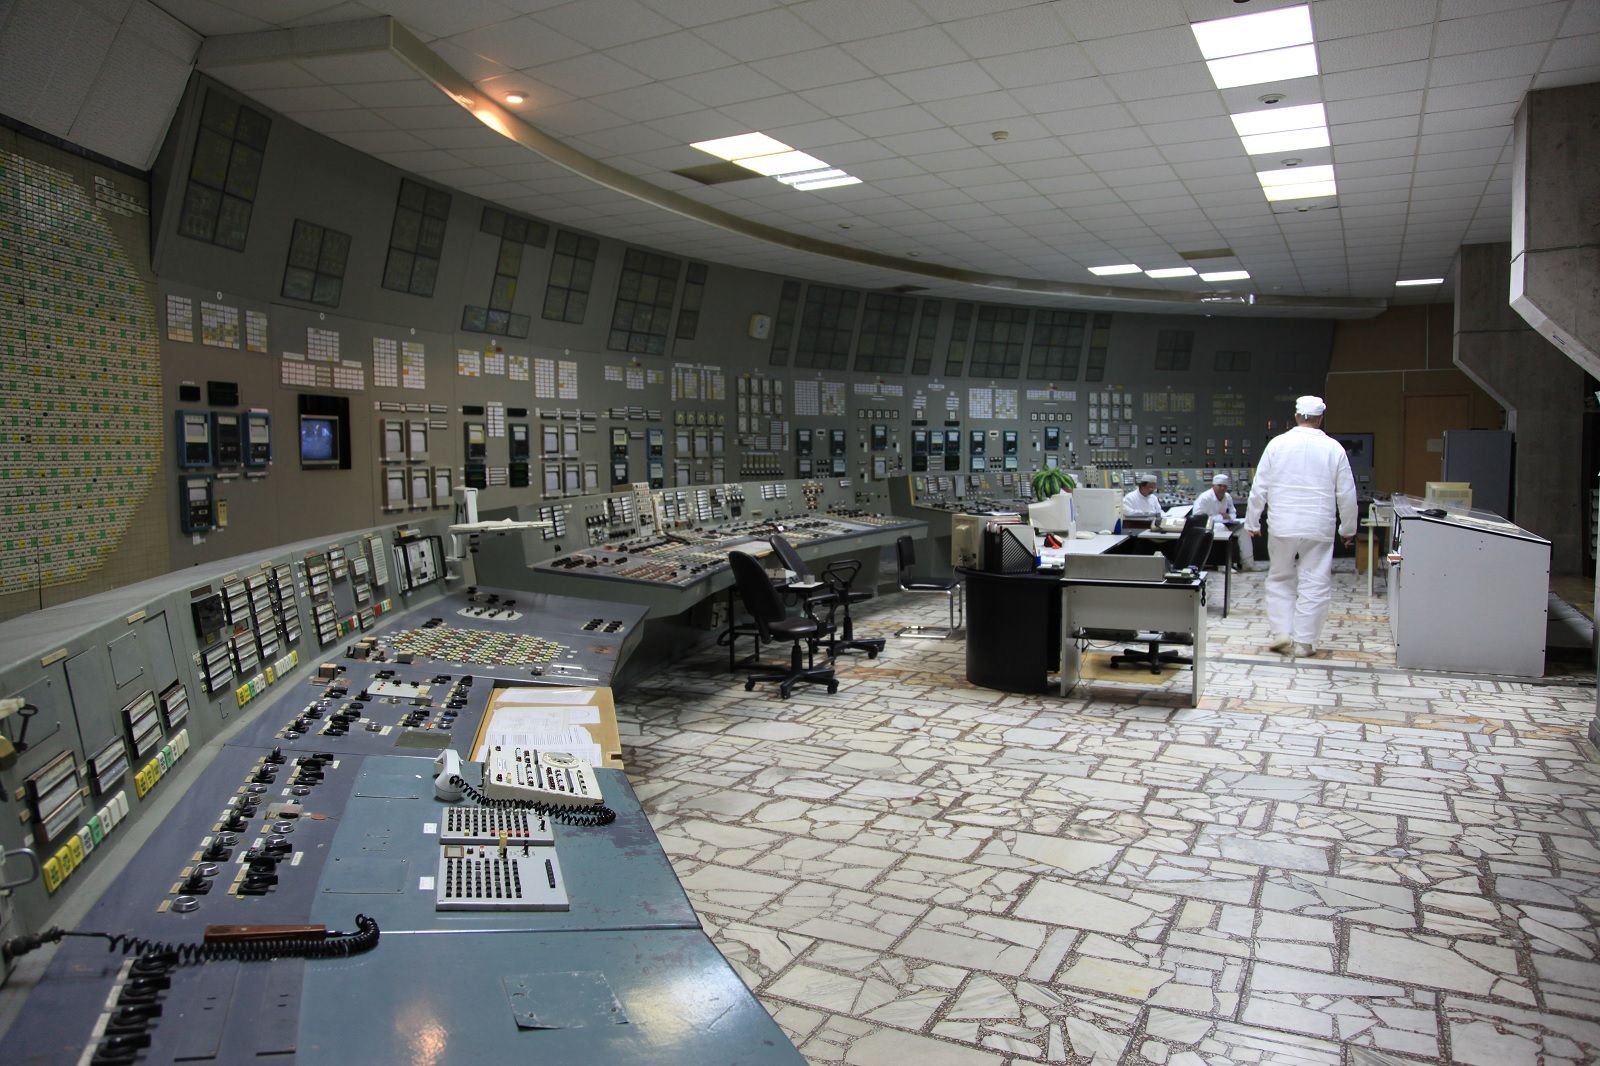 Satisfying Photos Of Classic Control Rooms That Once Ran The World image 3